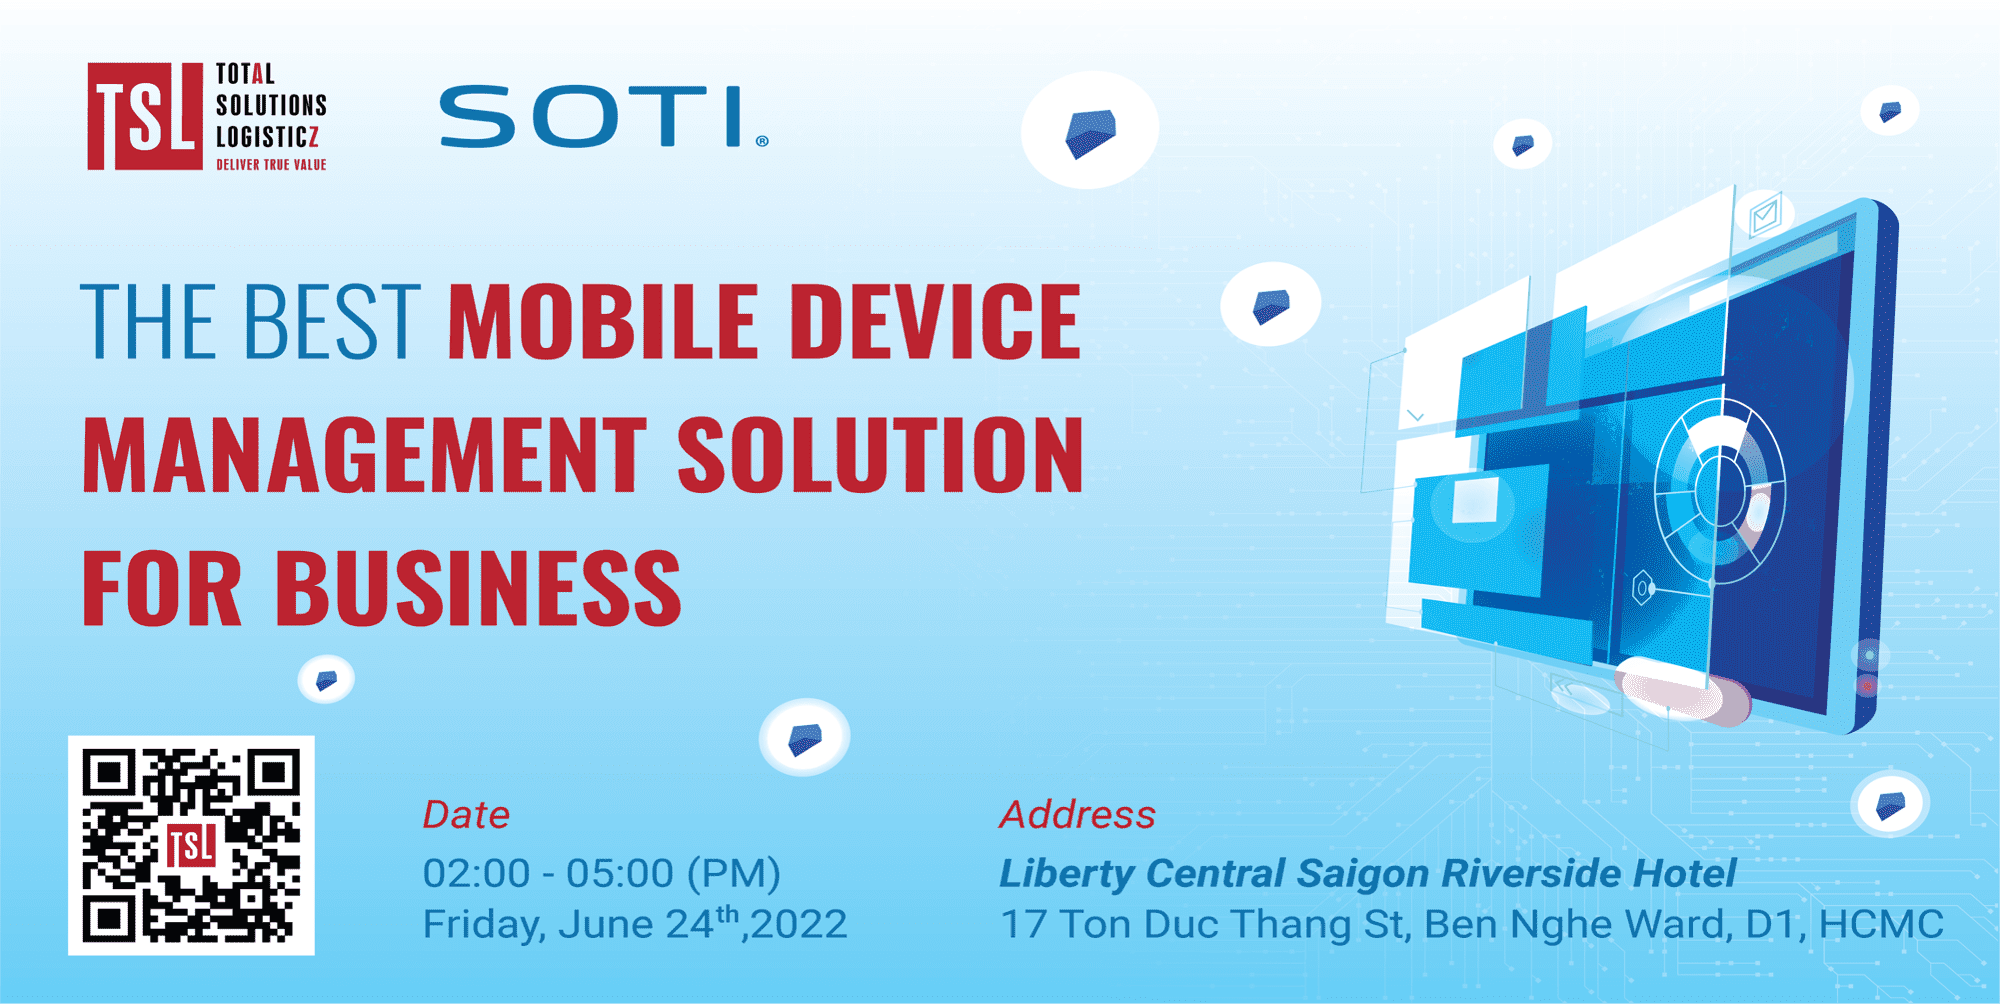 Workshop “The best mobile device management solution for business” and how to register